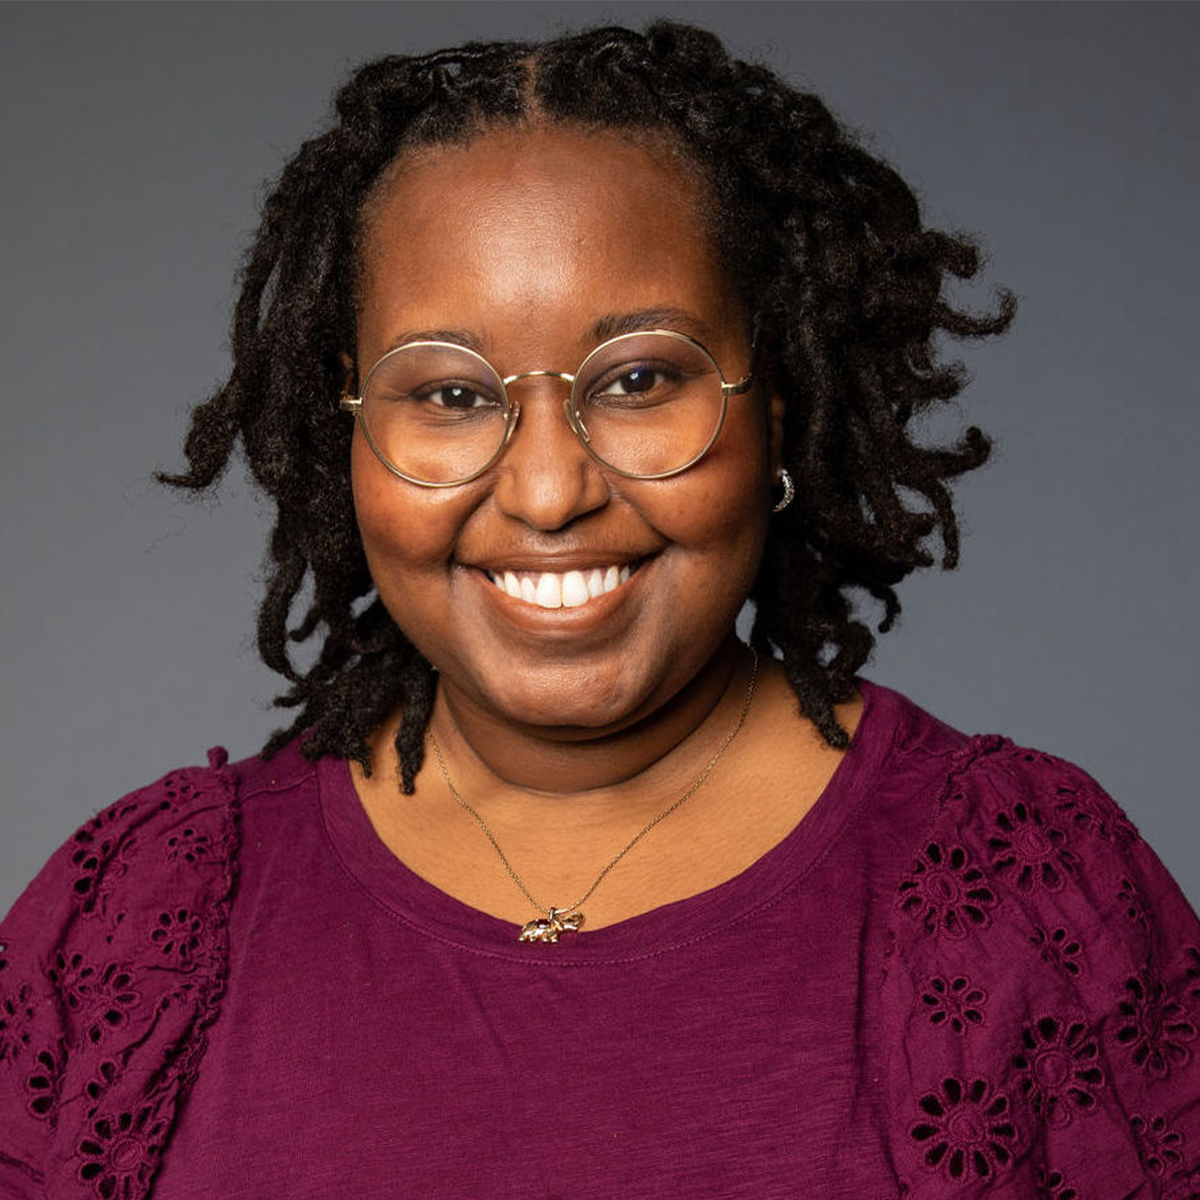 Britton Williams color portrait. Britton is a Black woman who is smiling in this portrait. Britton is wearing round, thin-framed glasses and a bright purple, and a pendant necklace.